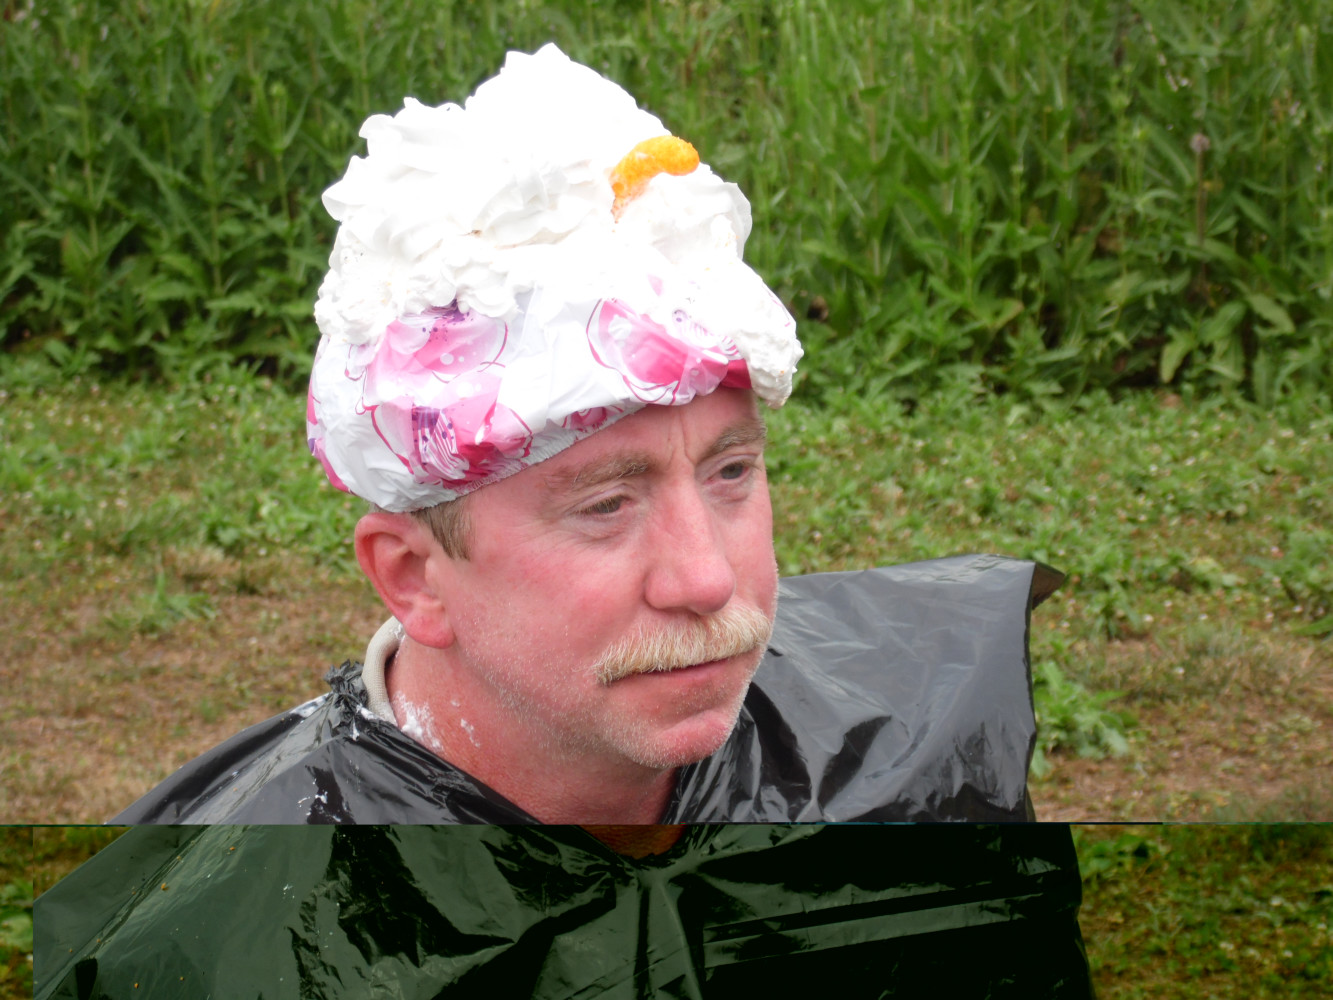 Bobby Salter volunteers to have Cheetos thrown at his whipped cream covered head.   